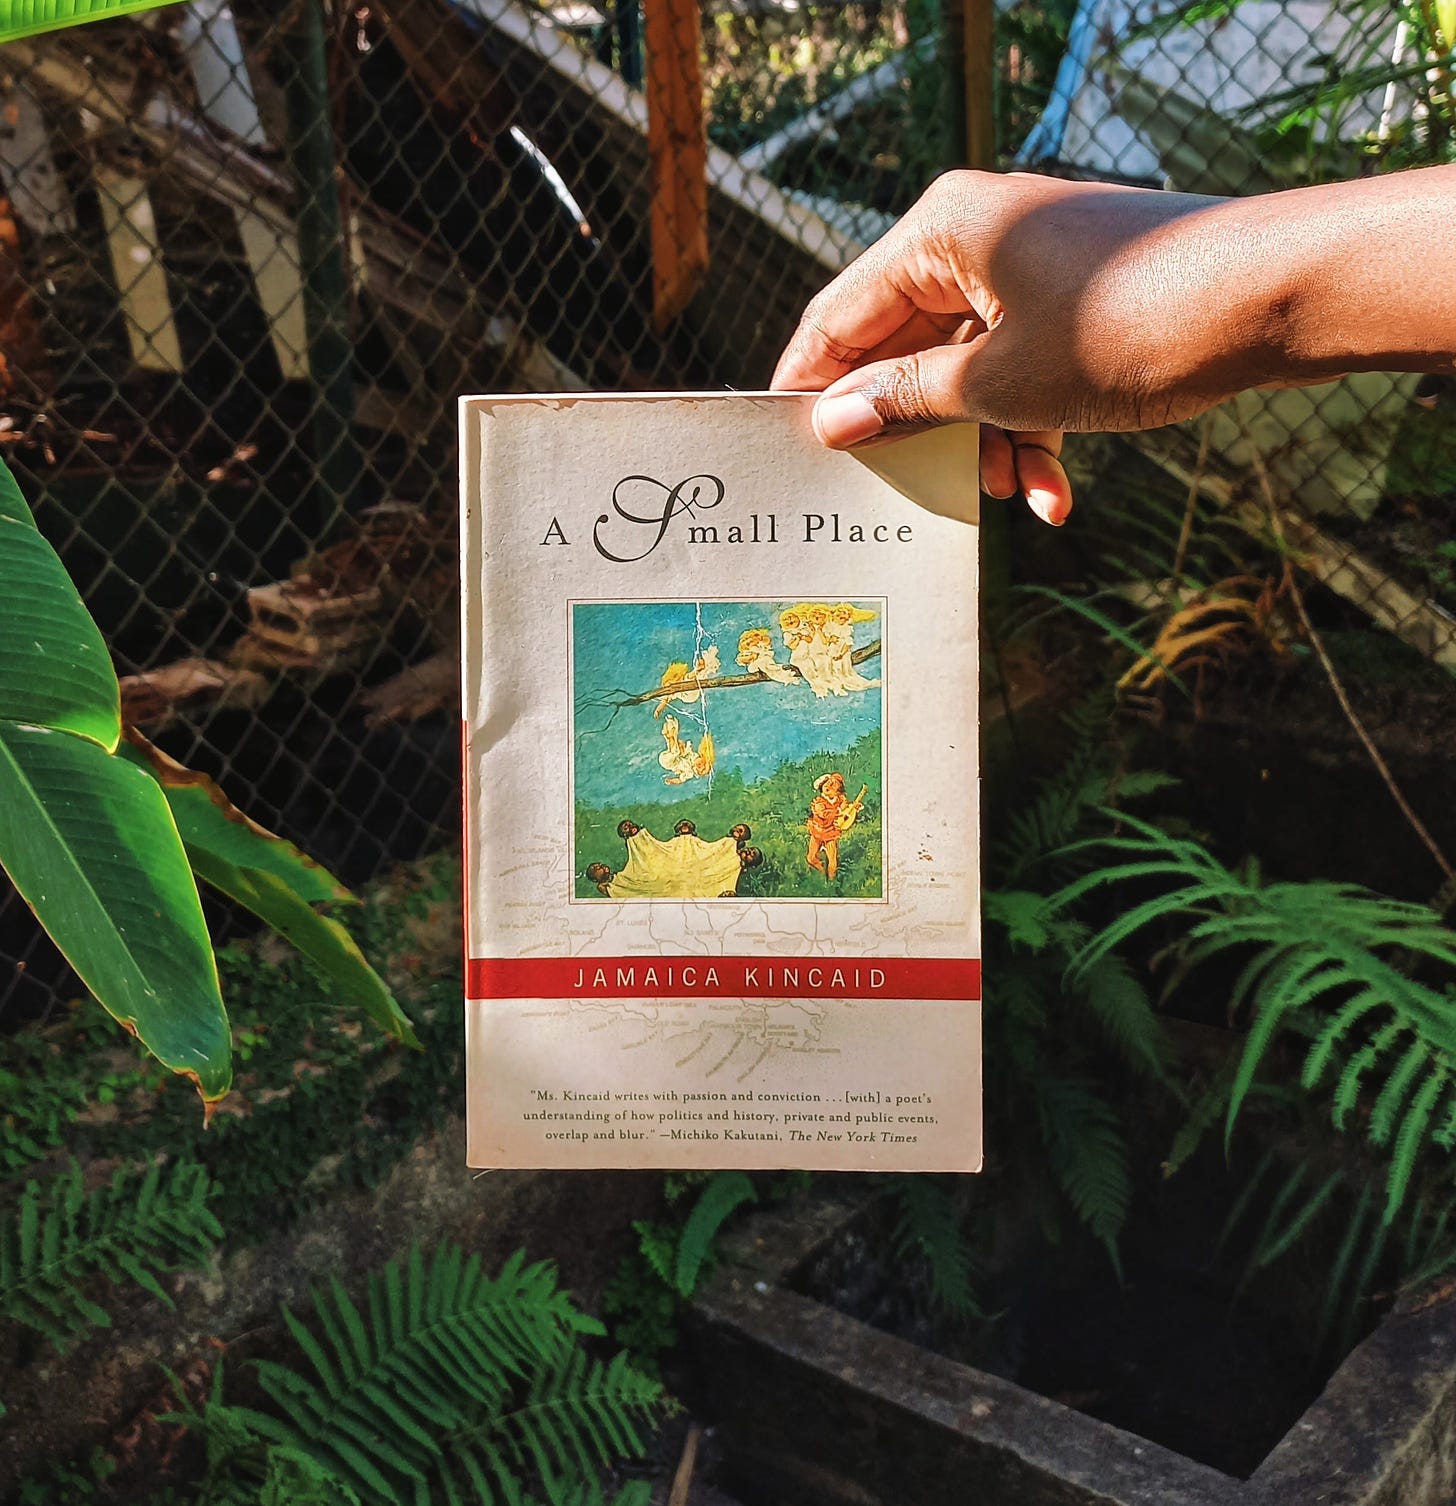 My black hand holds a paperback copy of A Small Place with plants and part of a wired enclosure in the background.